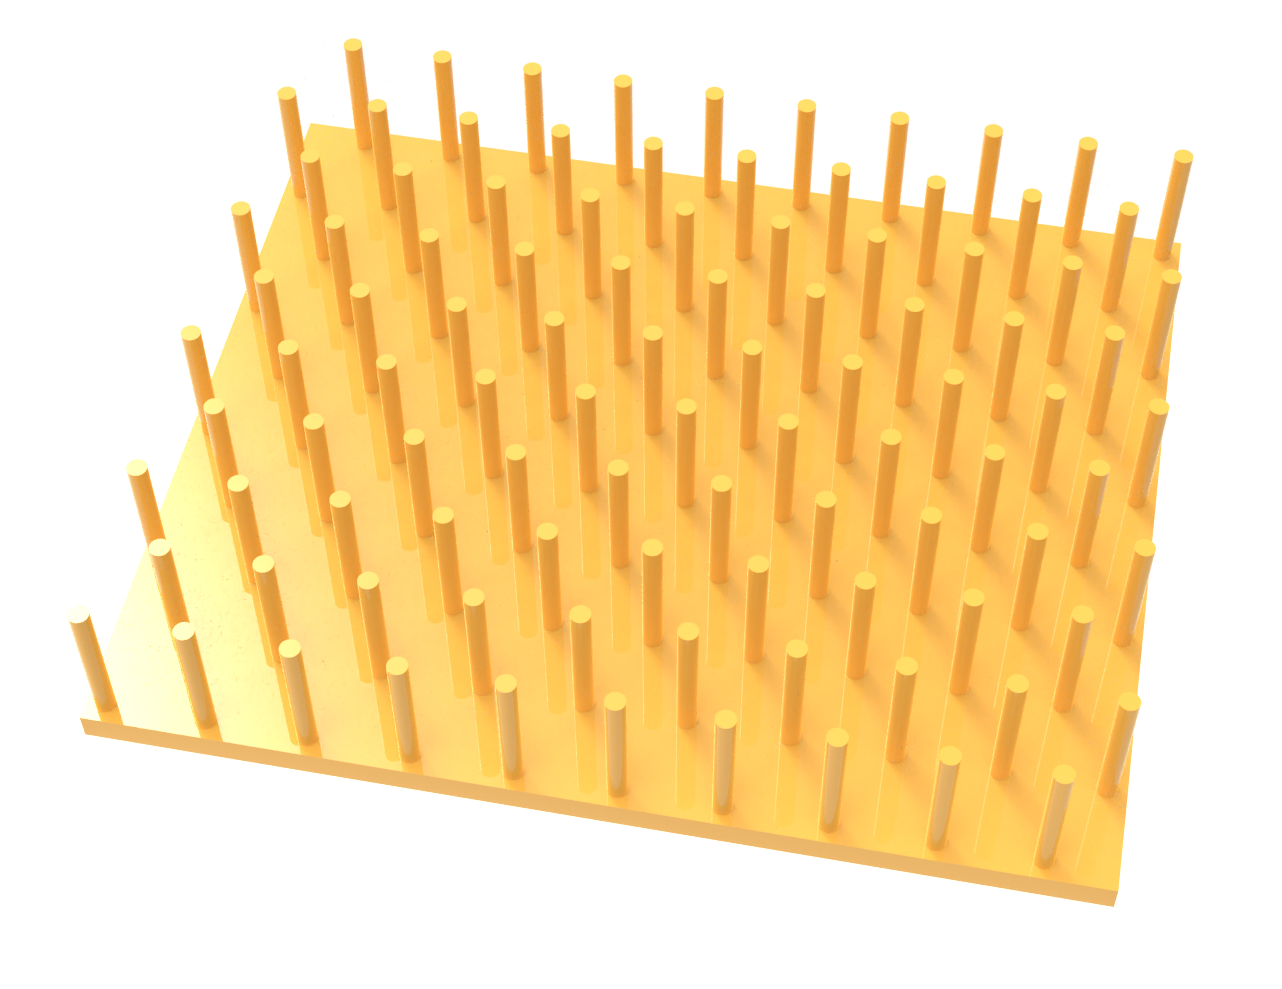 Schematic of the nanorod array